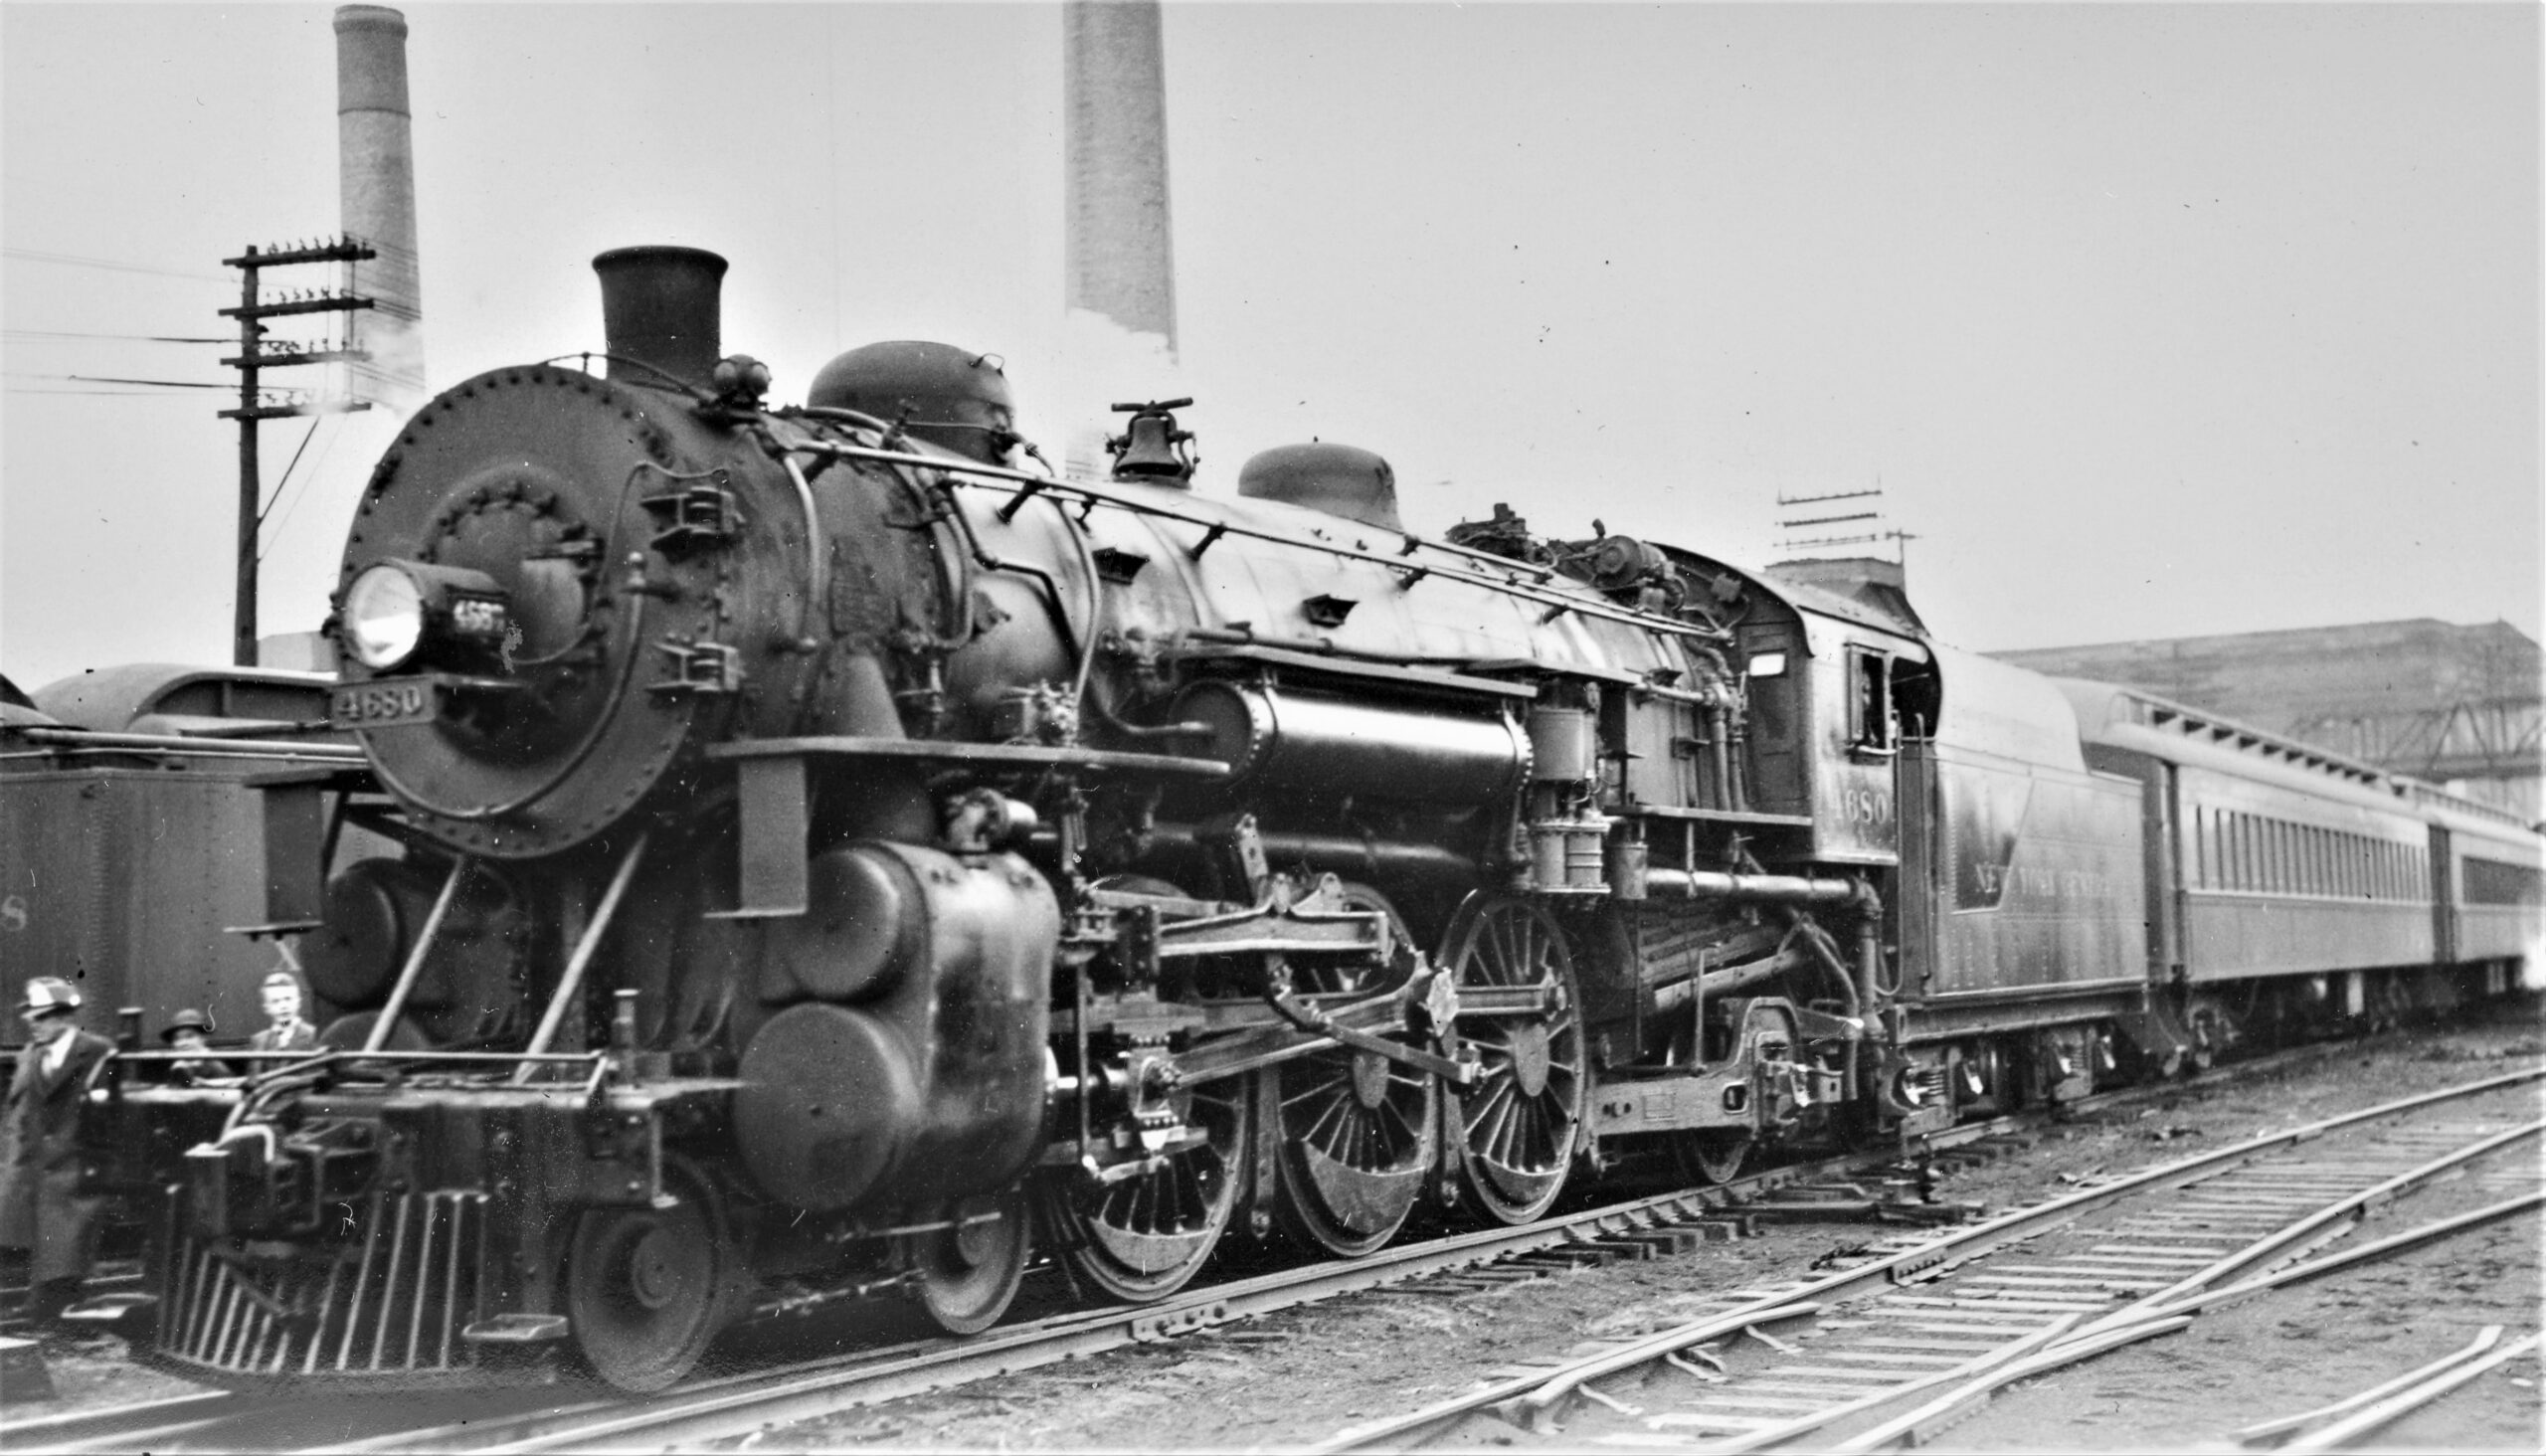 New York Central | West Albany, New York | Class K 4-6-2 # 4680 steam locomotive | Passenger station and train | March 19,1939